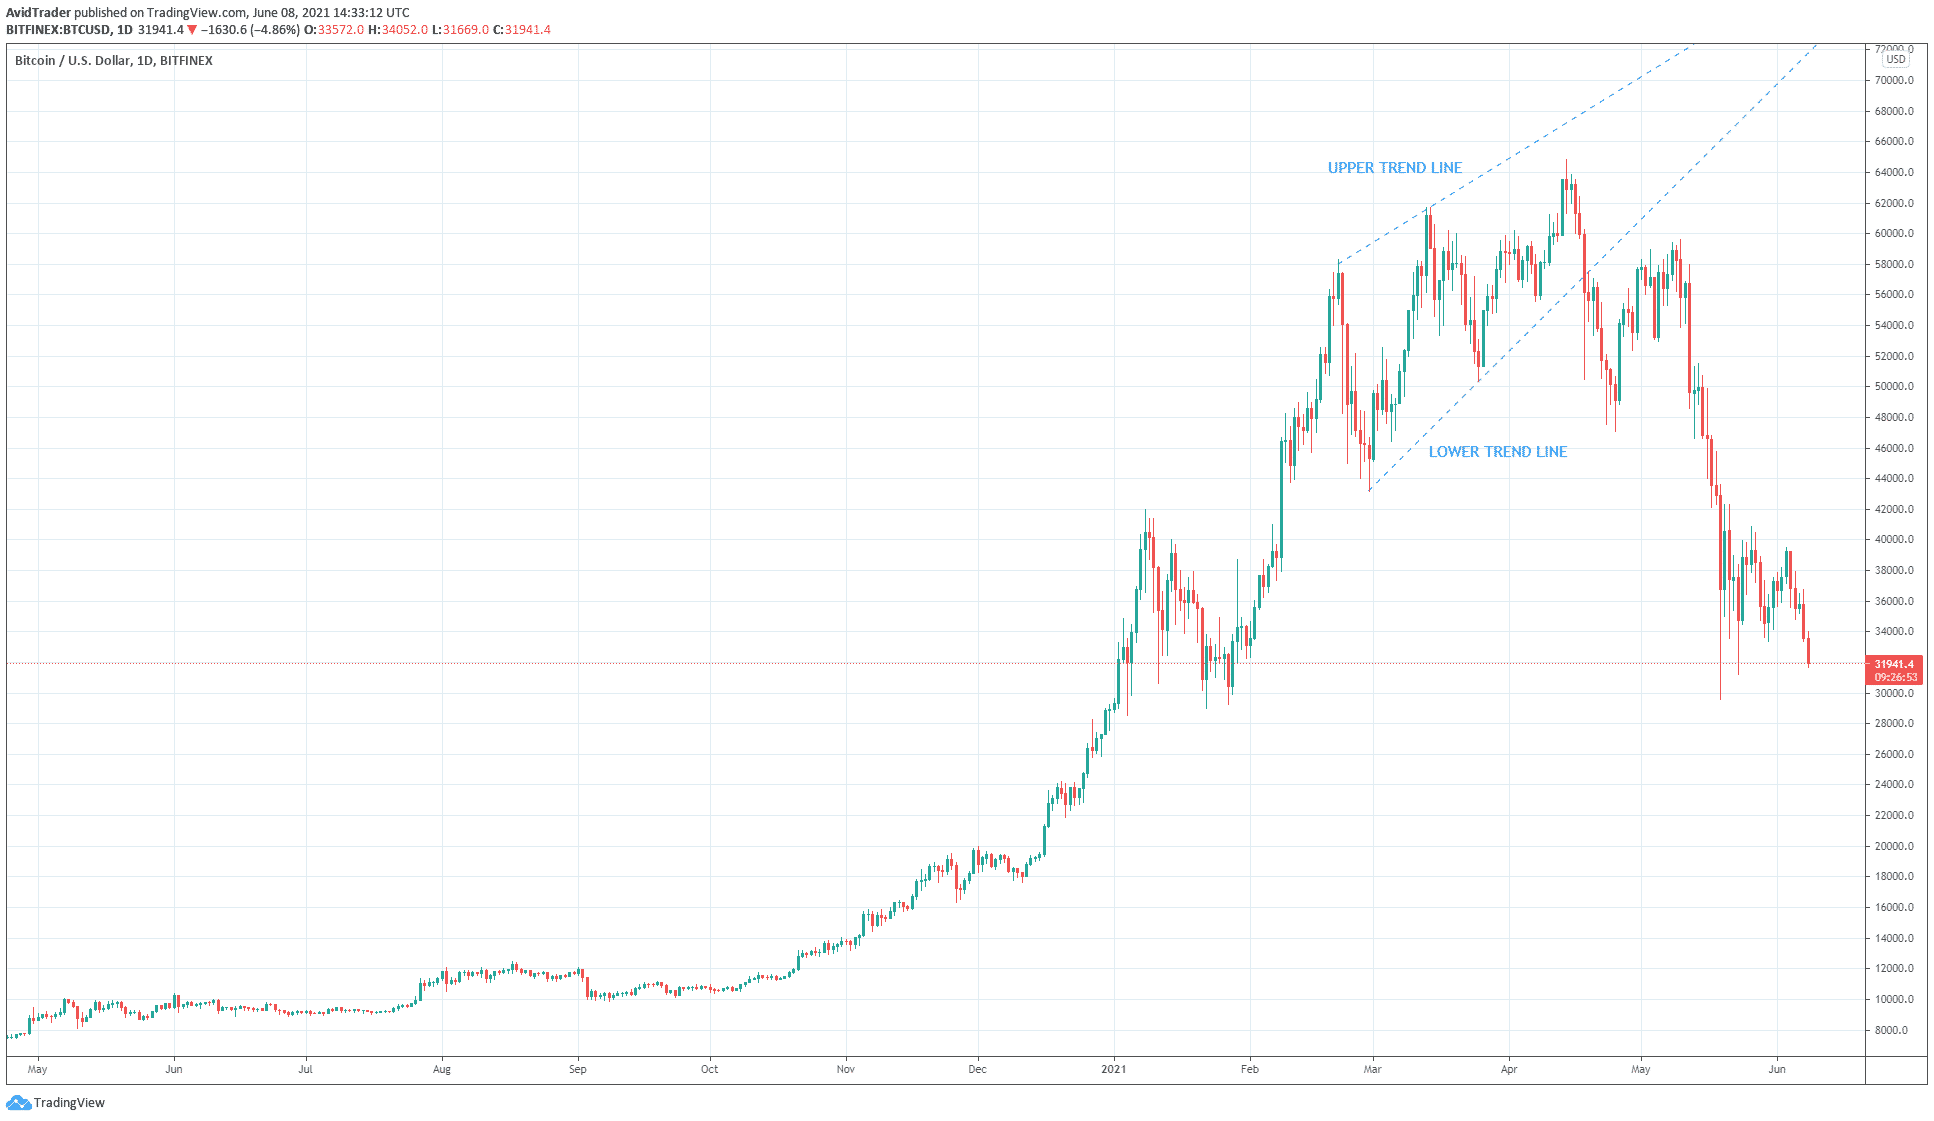 the daily chart of BTC